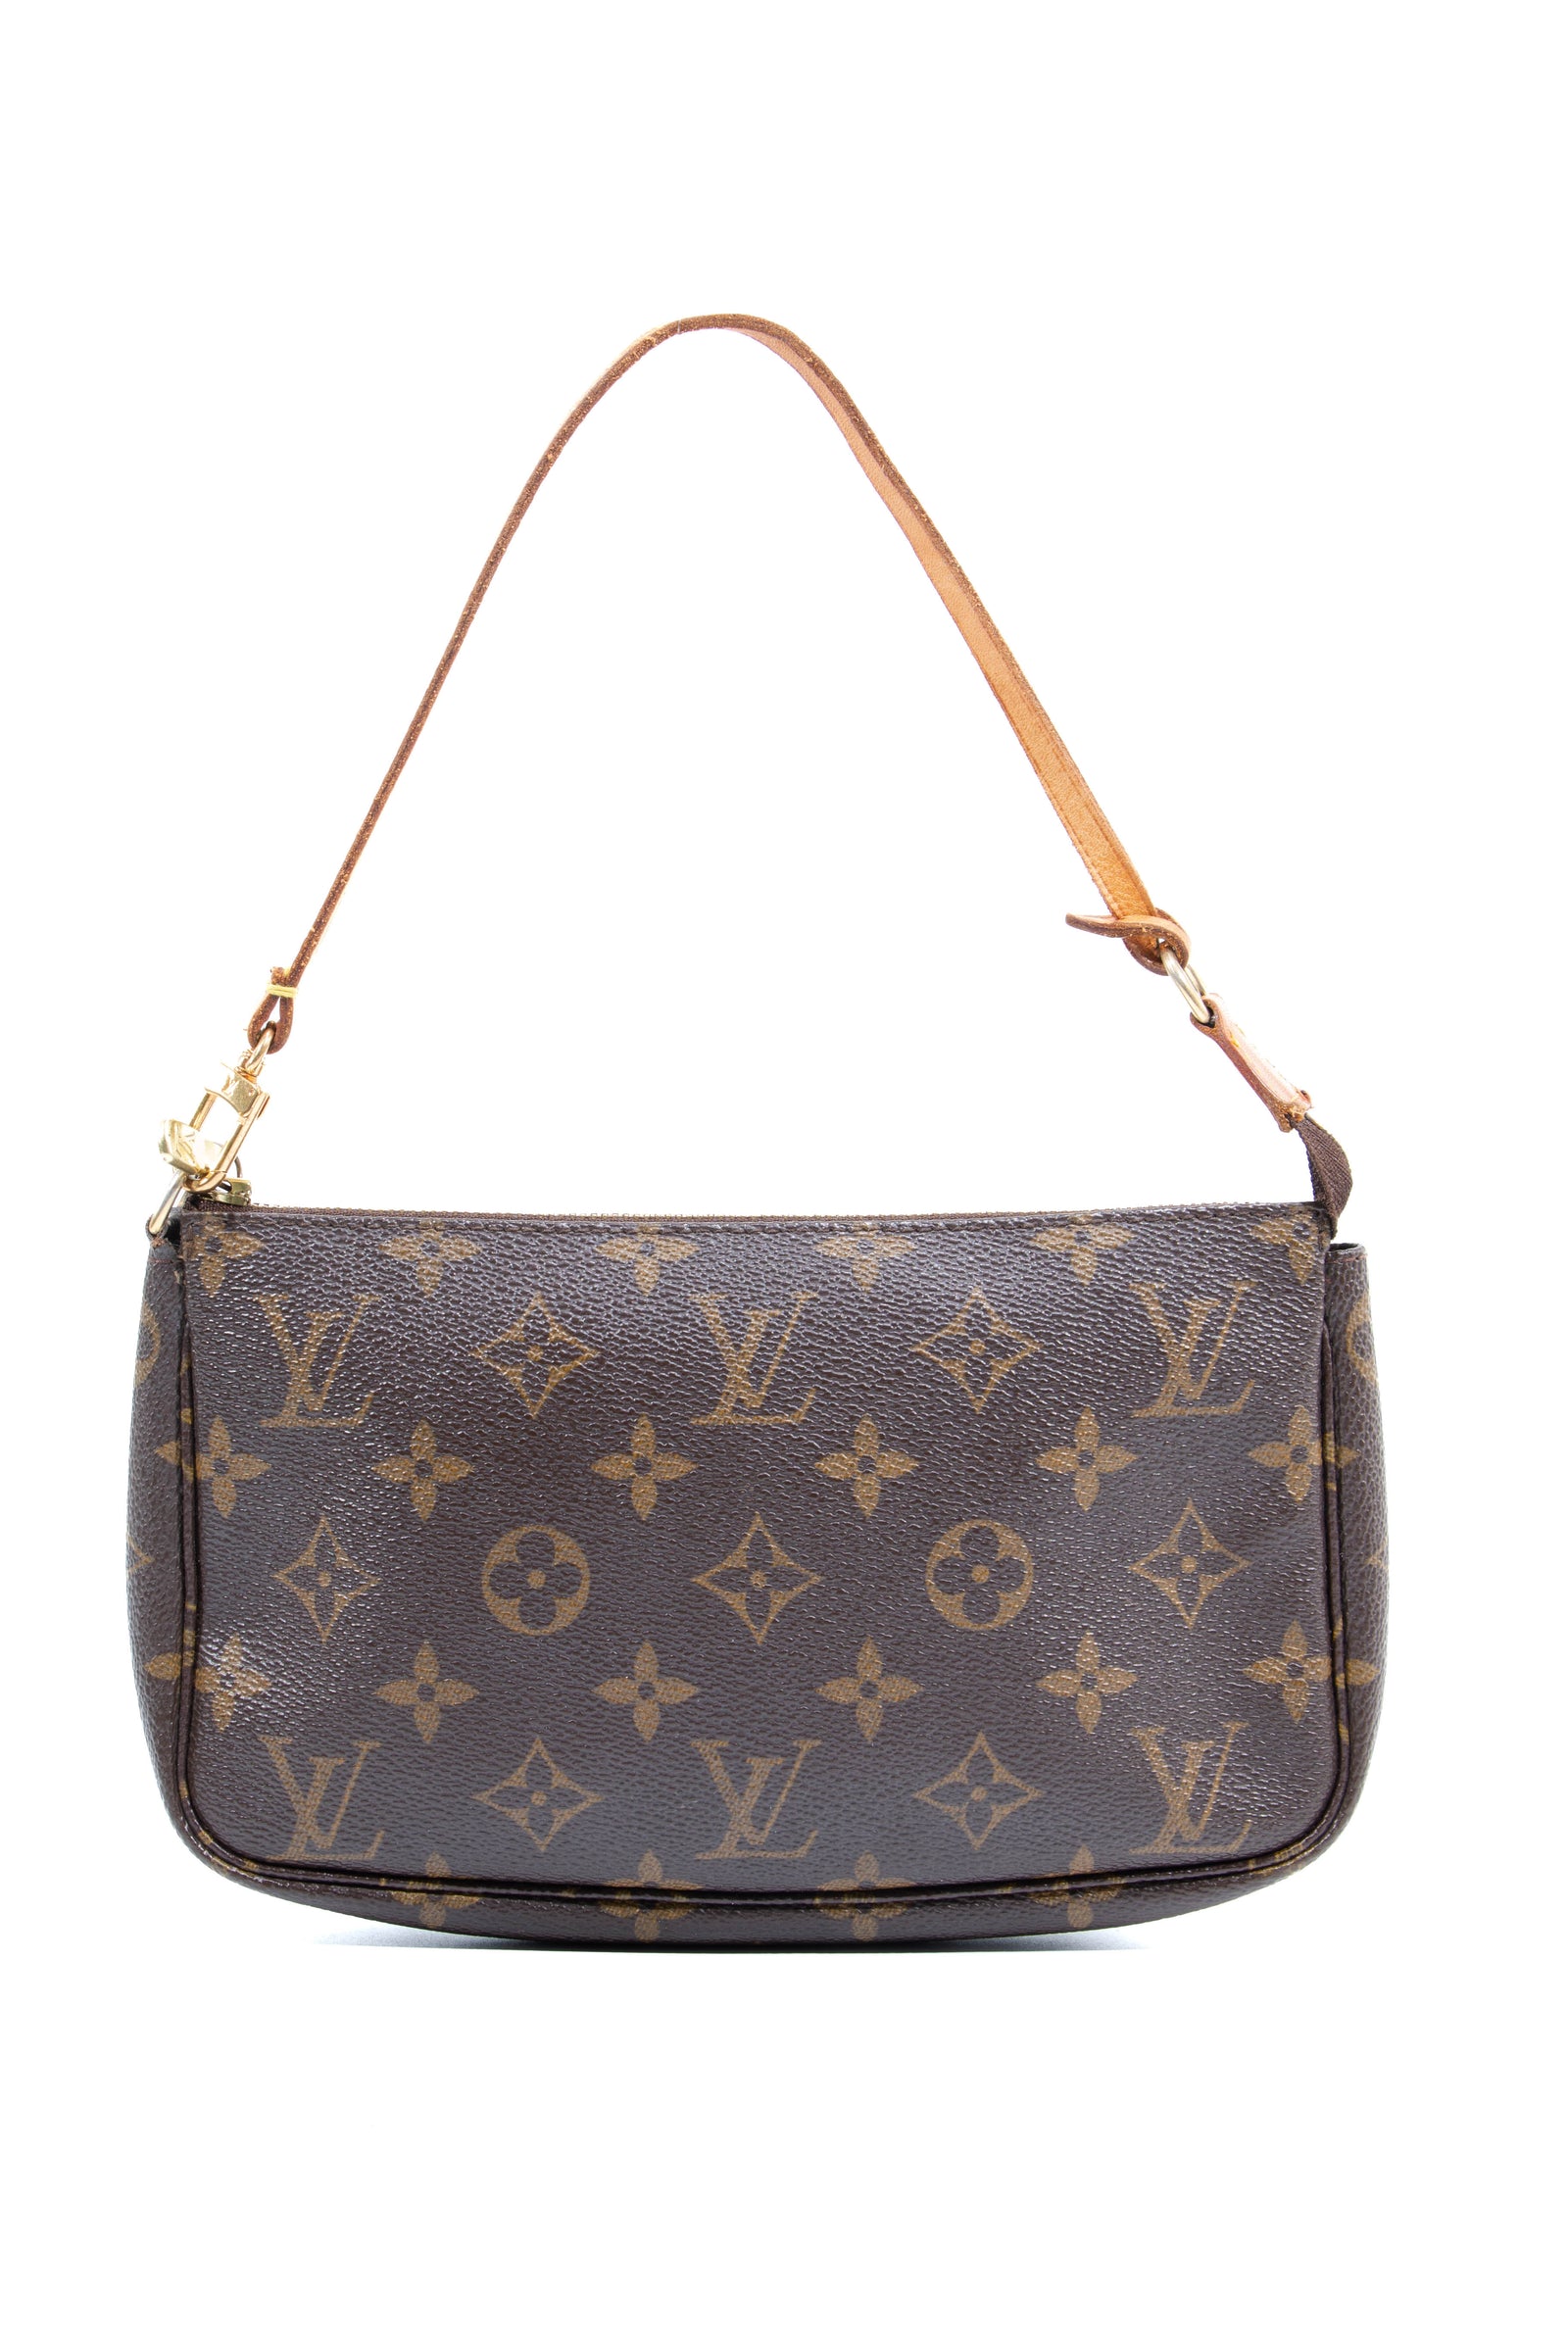 Louis Vuitton Limited Edition Bags - A Bold And Worthy Investment